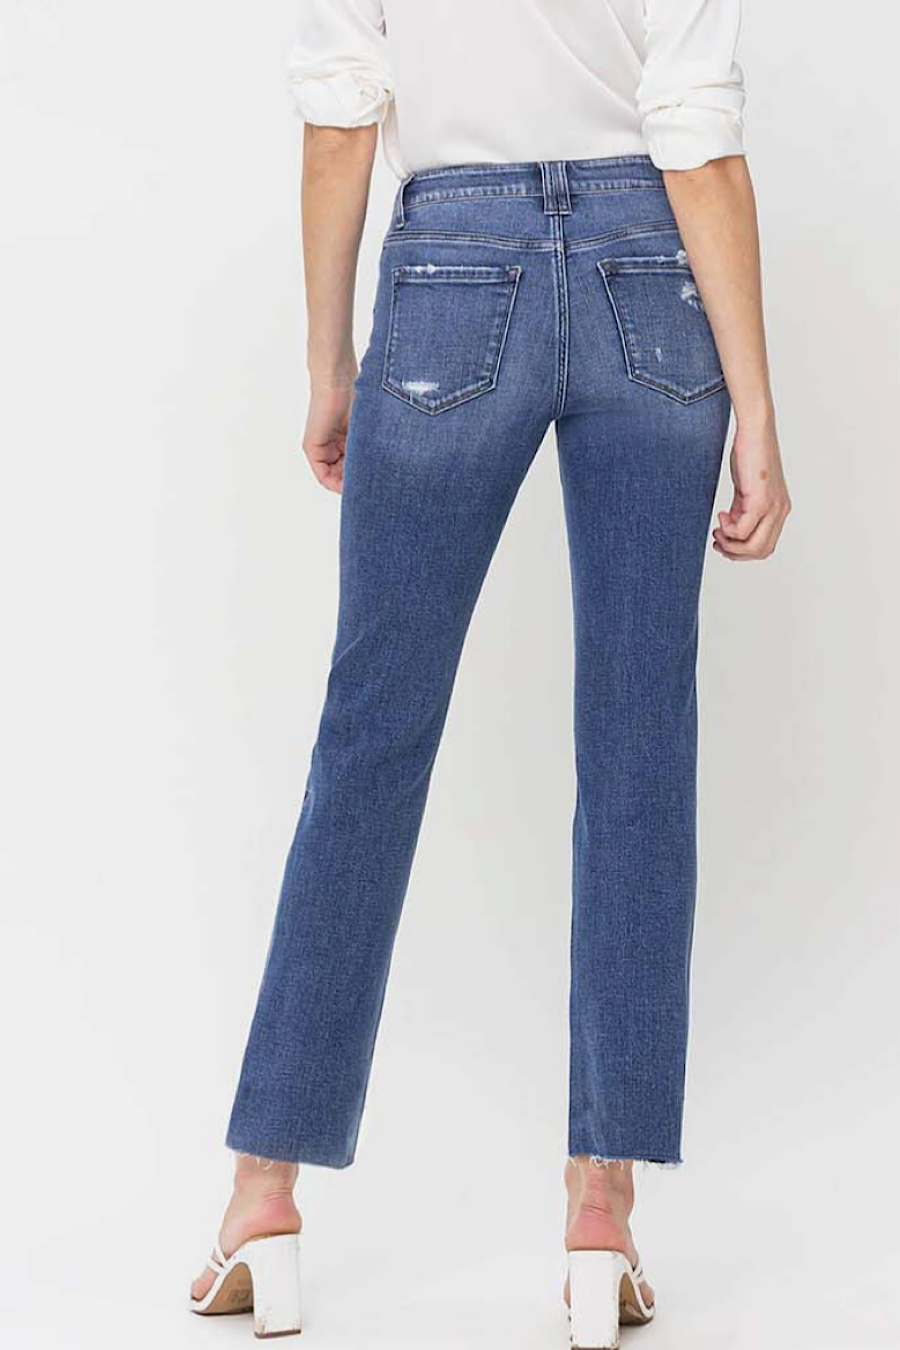 FM Prudent Straight Jeans